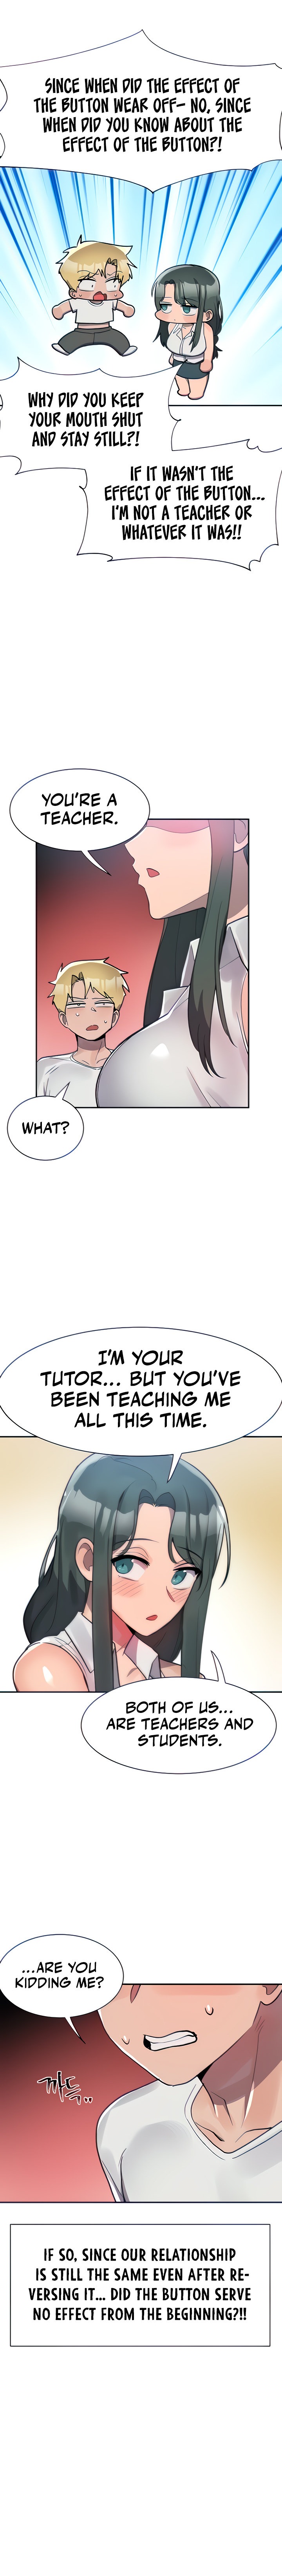 Relationship Reverse Button: Let’s Educate That Arrogant Girl - Chapter 8 Page 4